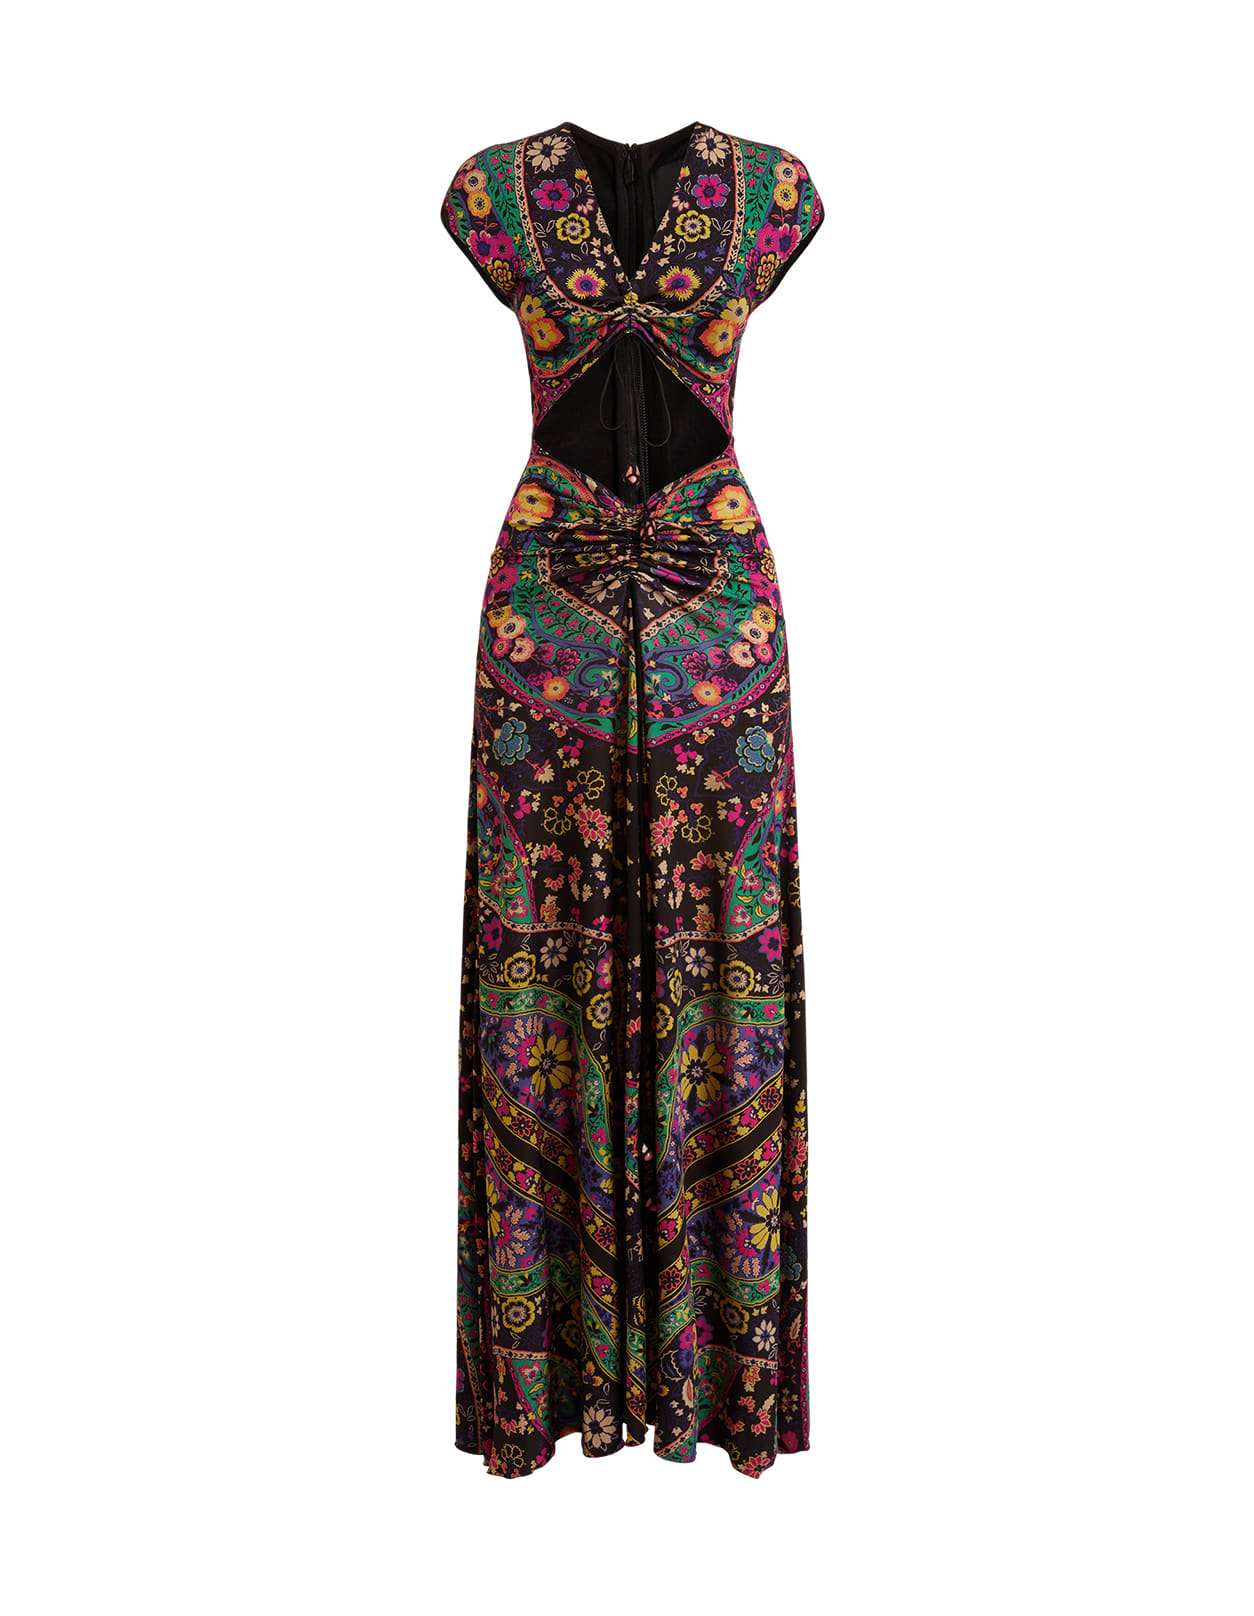 Etro Long Black Dress With Multicolored Floral Floulard Print